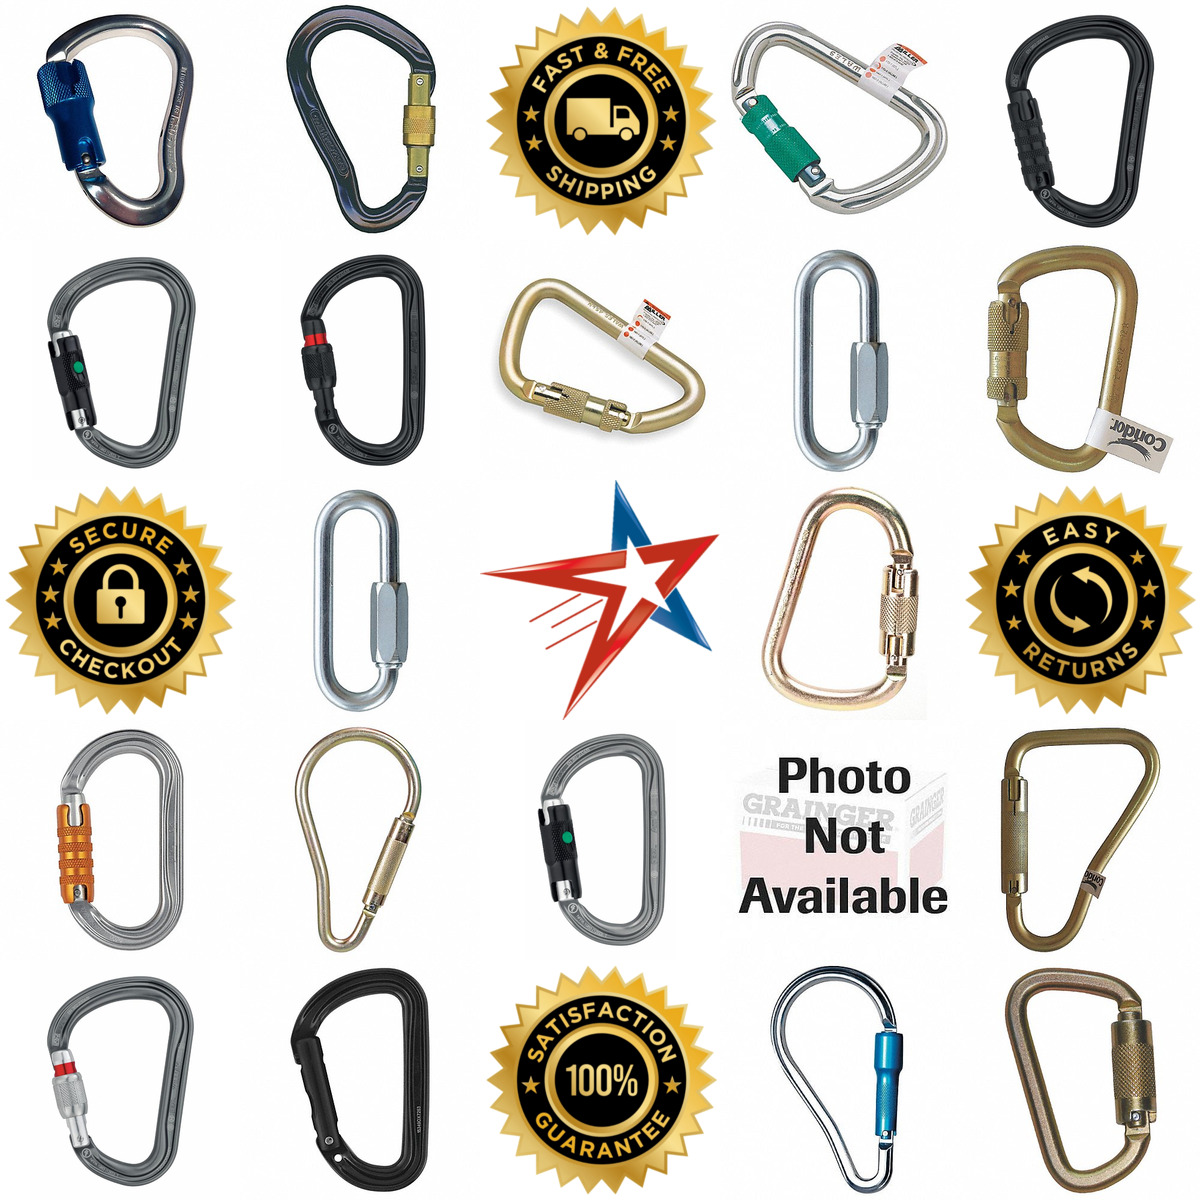 A selection of Carabiners For Fall Protection products on GoVets